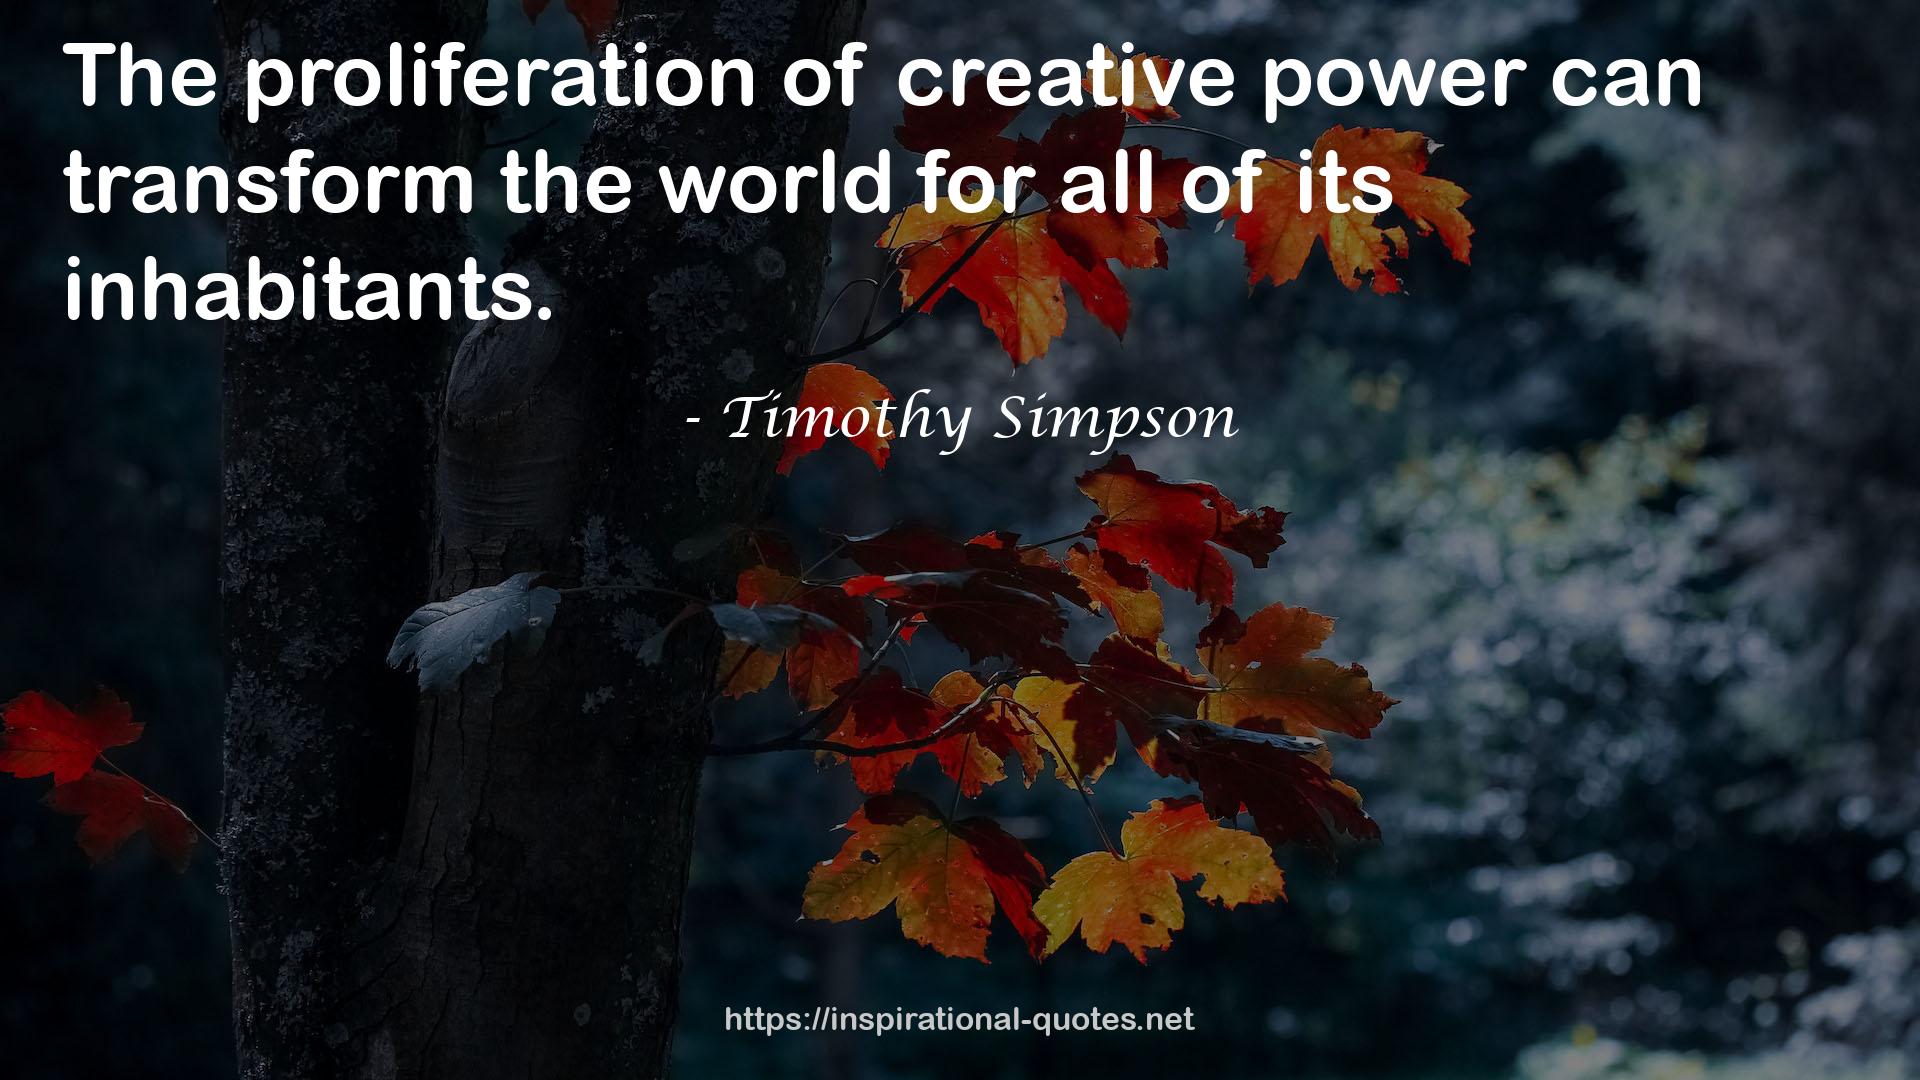 Timothy Simpson QUOTES